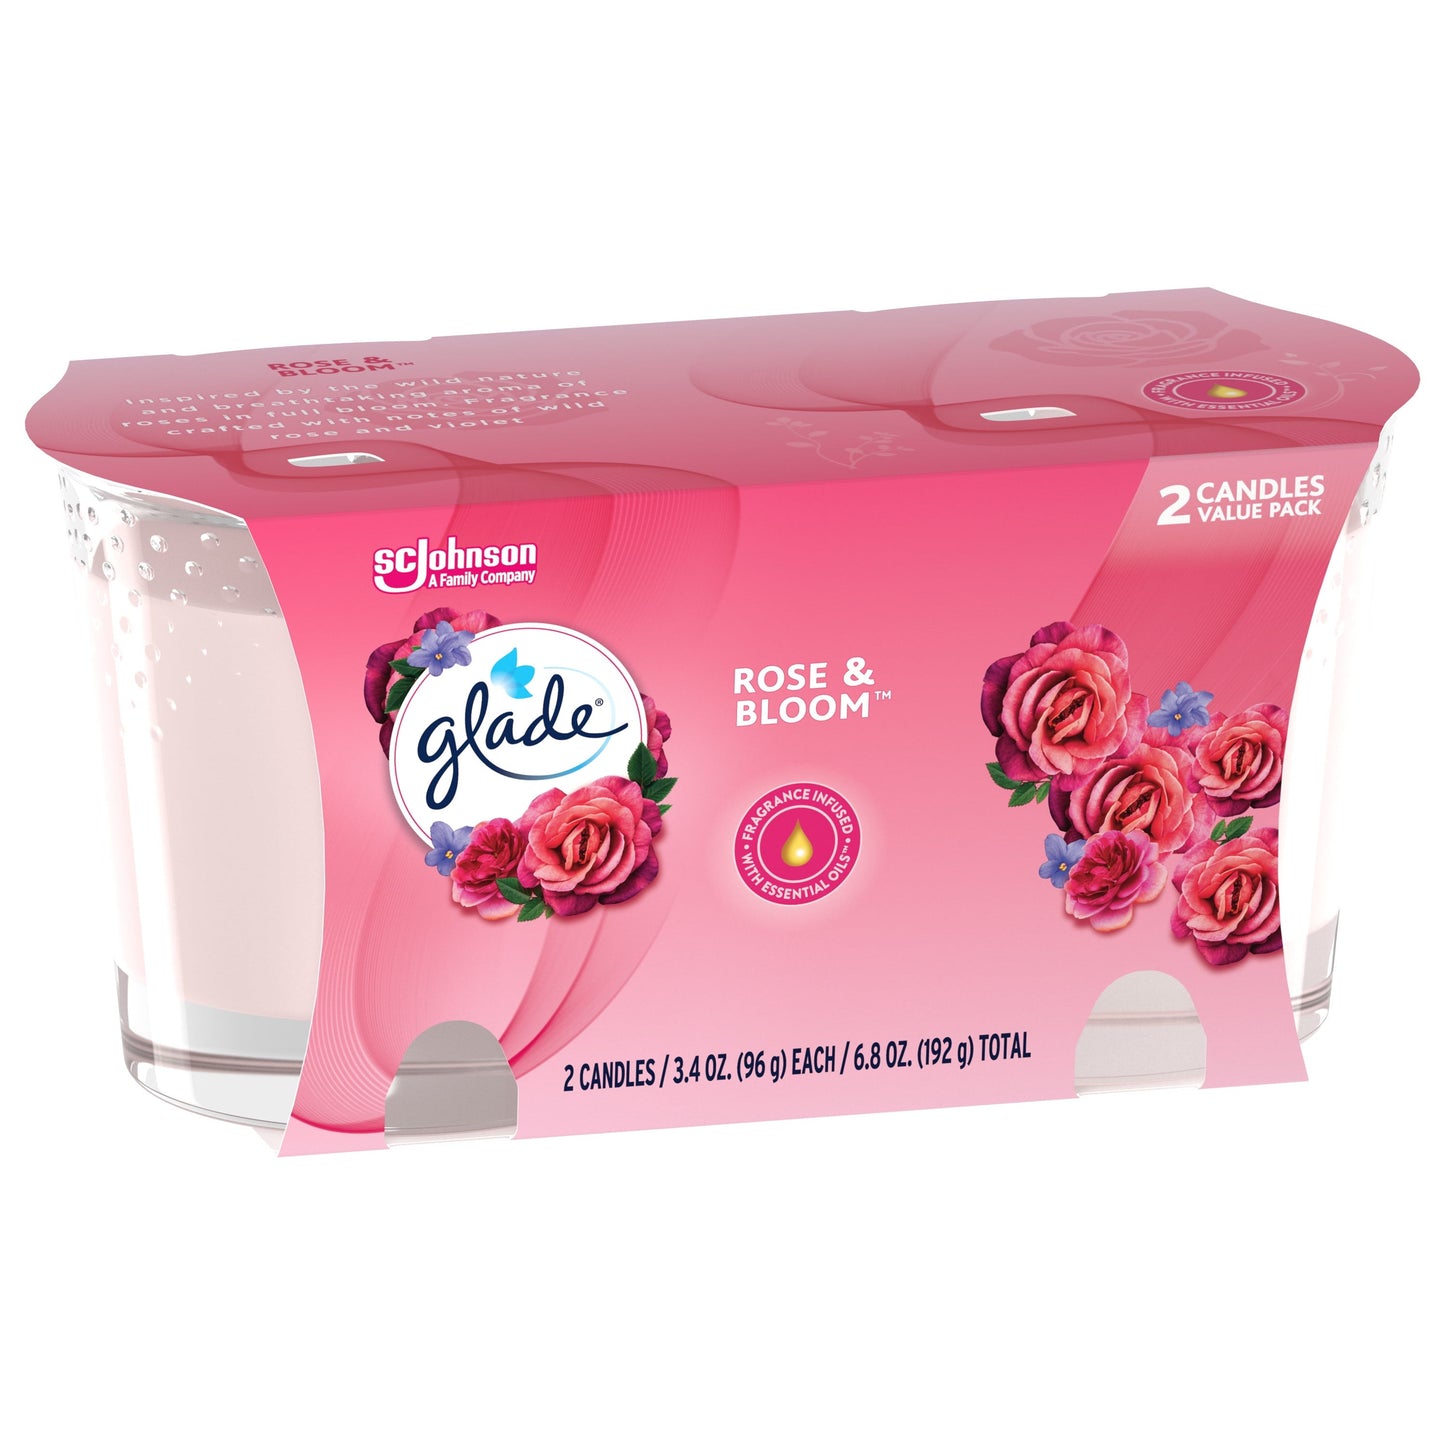 Glade Small Candle, Scented Candles, Rose & Bloom, 2 x 3.4 oz